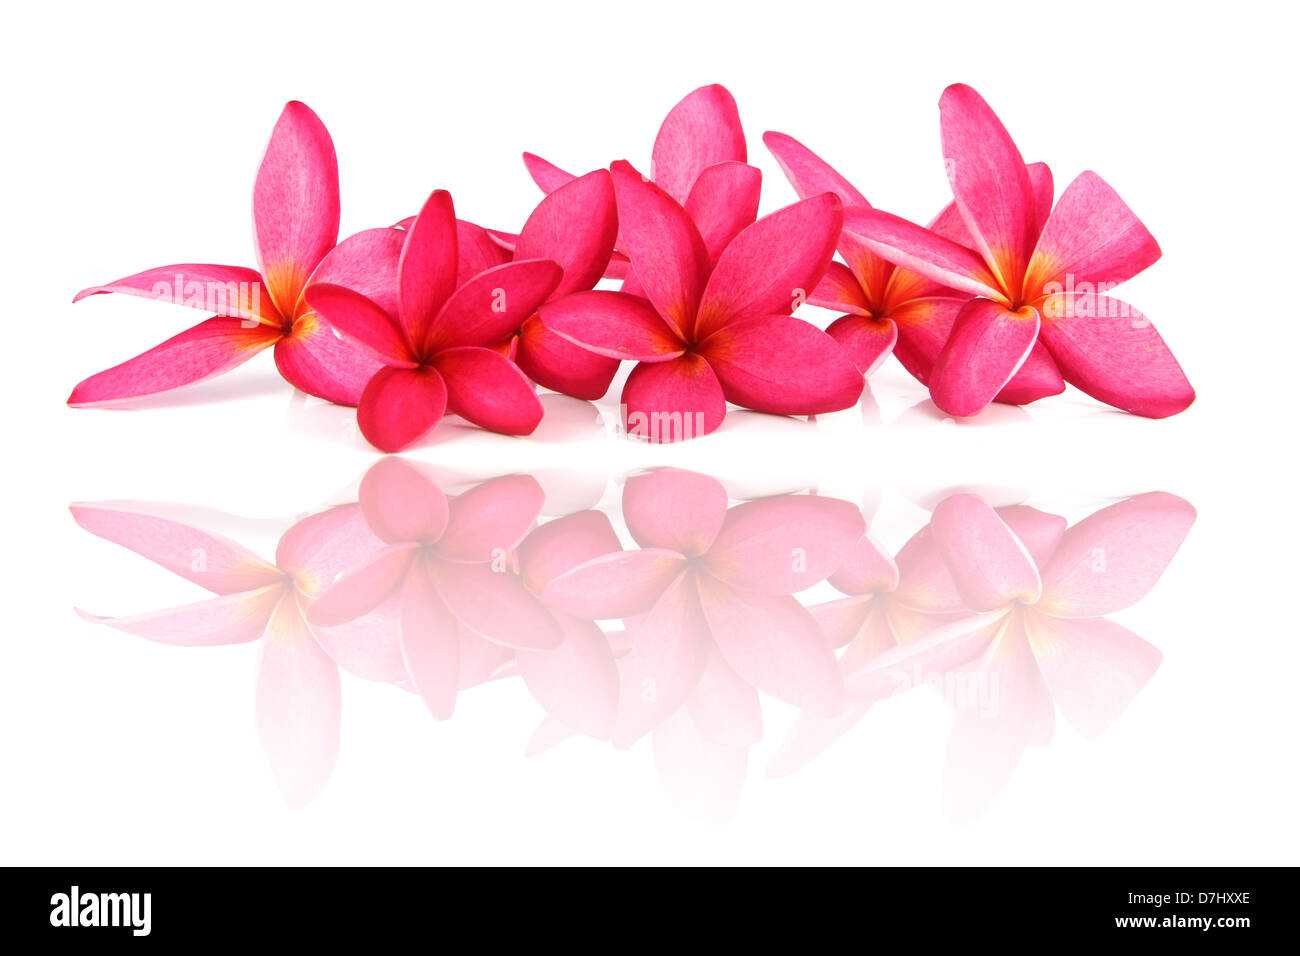 The Red frangipani Colors on a white background. Stock Photo